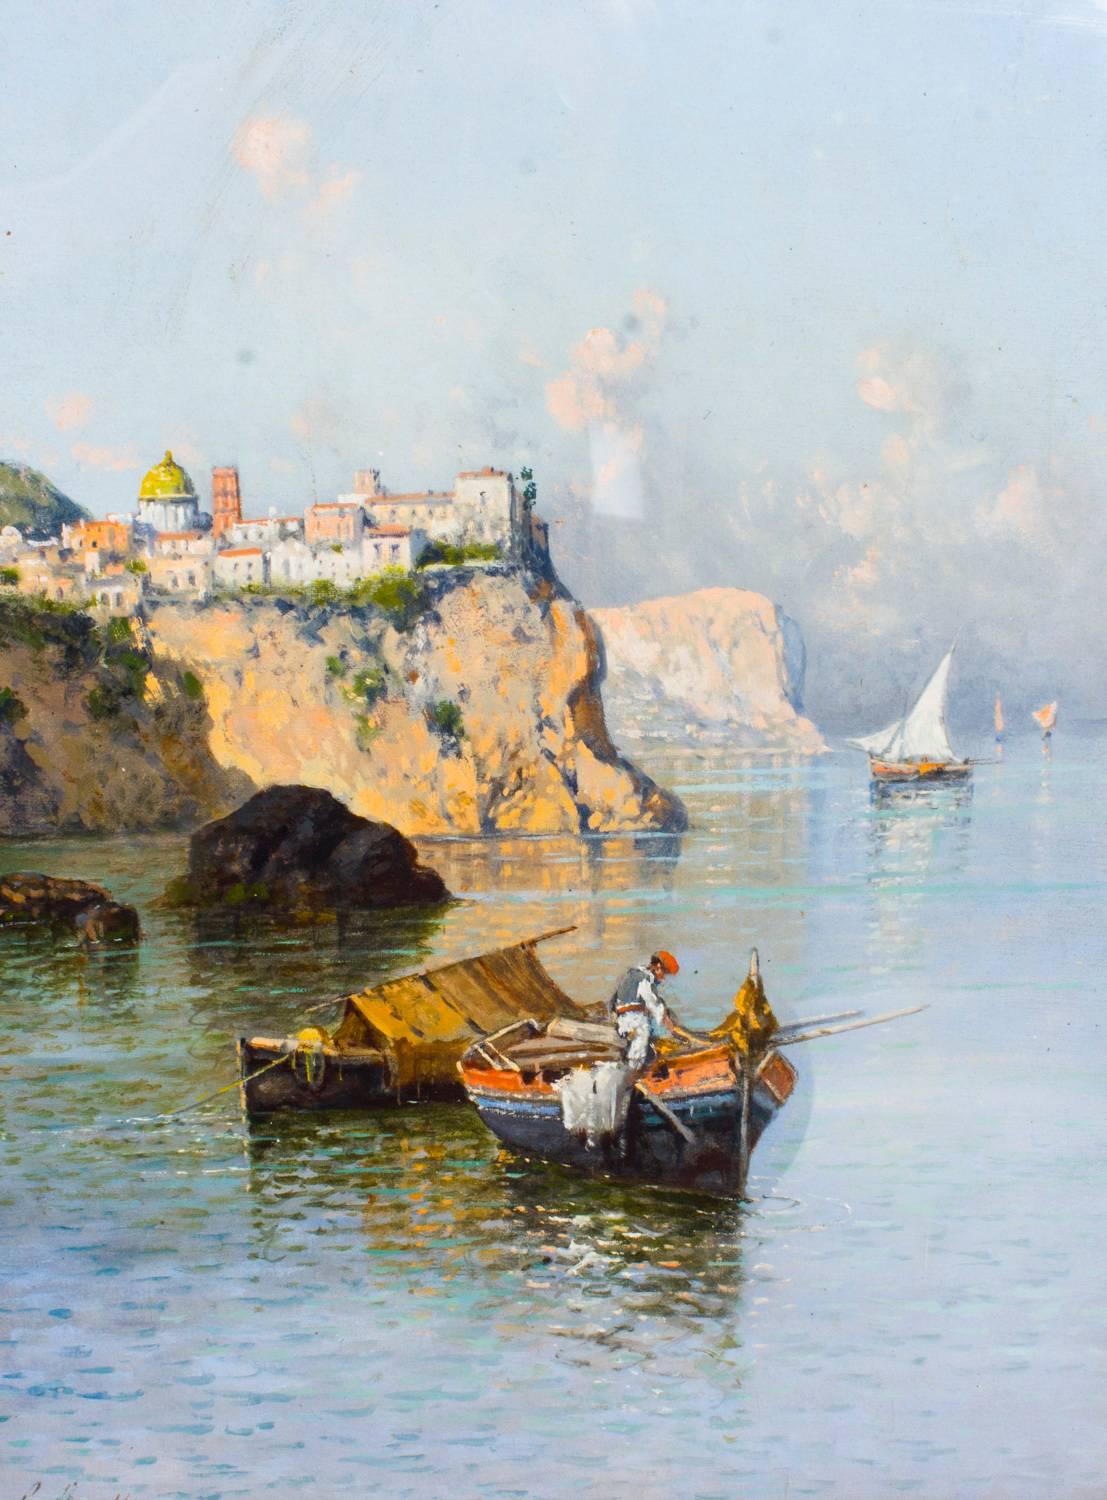 This is a beautiful antique oil on canvas seascape painting by Giuseppe Carelli (Italian 1858-1921) of a coastal scene near Naples in Southern Italy, signed lower left.

This painting features fishermen in rowing boats and sail boats on calm